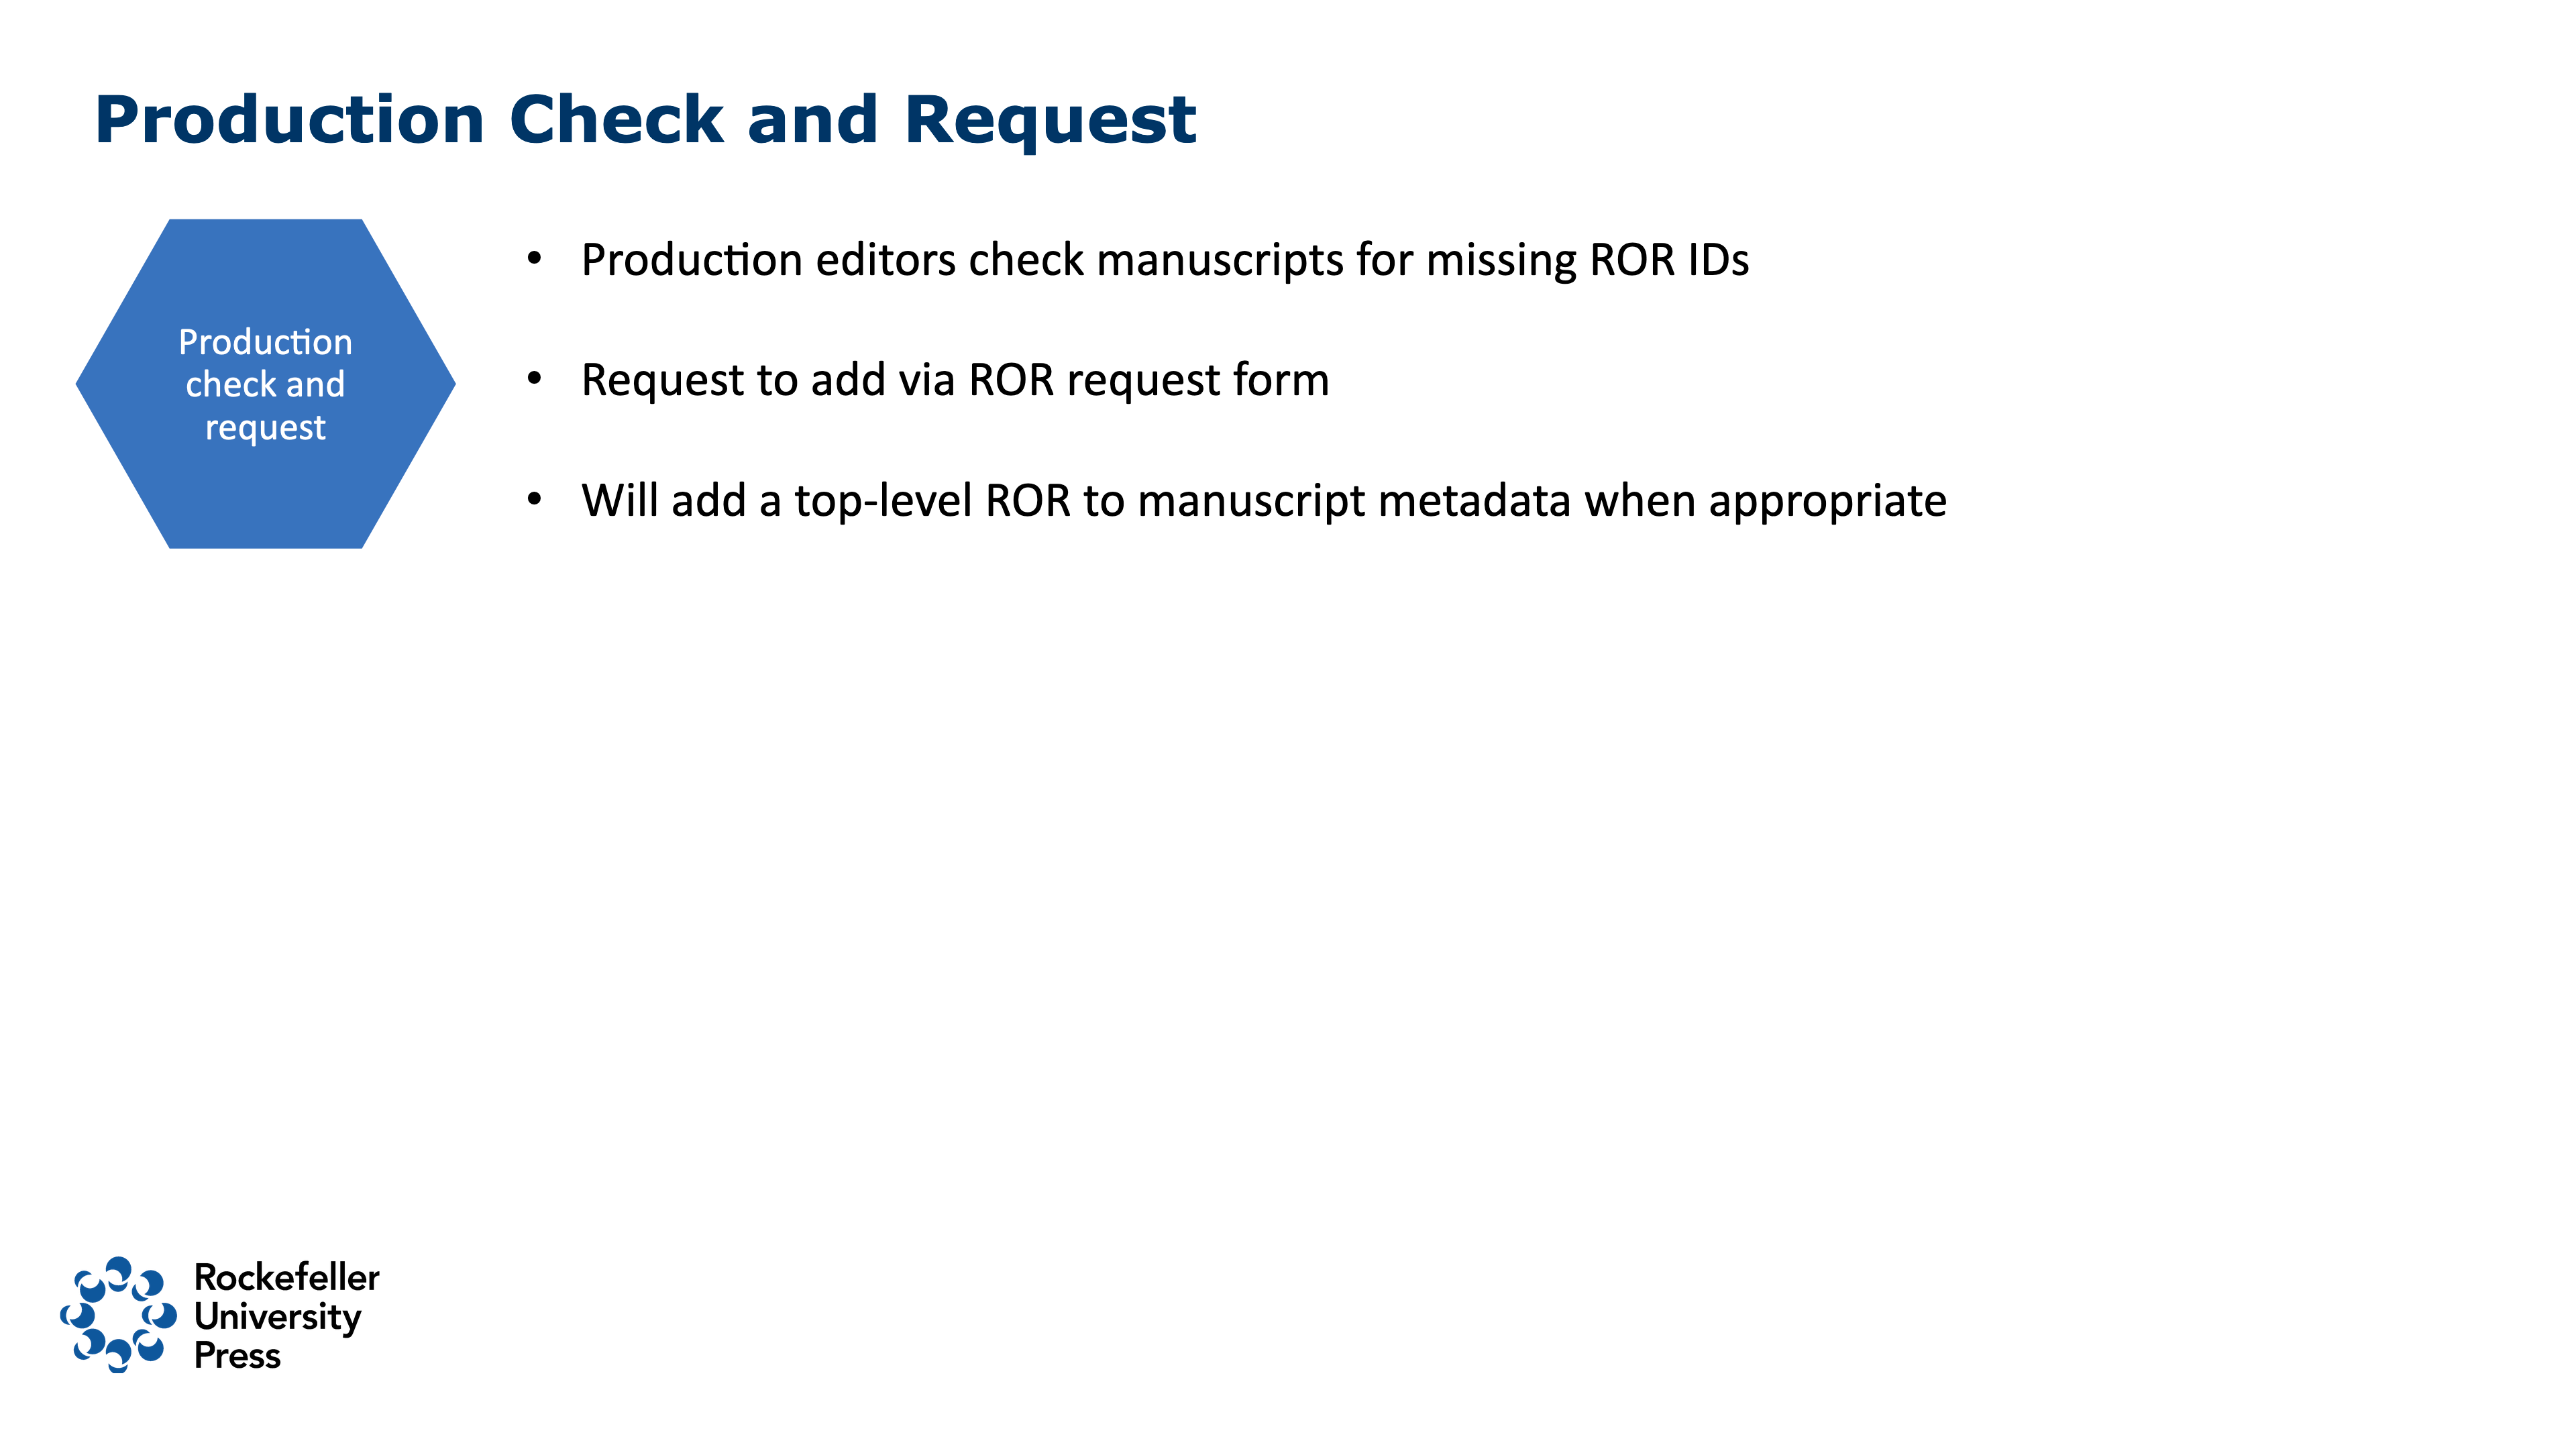 Production Check and Request: Production editors check manuscripts for missing ROR IDs, request to add via ROR request form, will add a top-level ROR to manuscript metadata when appropriate